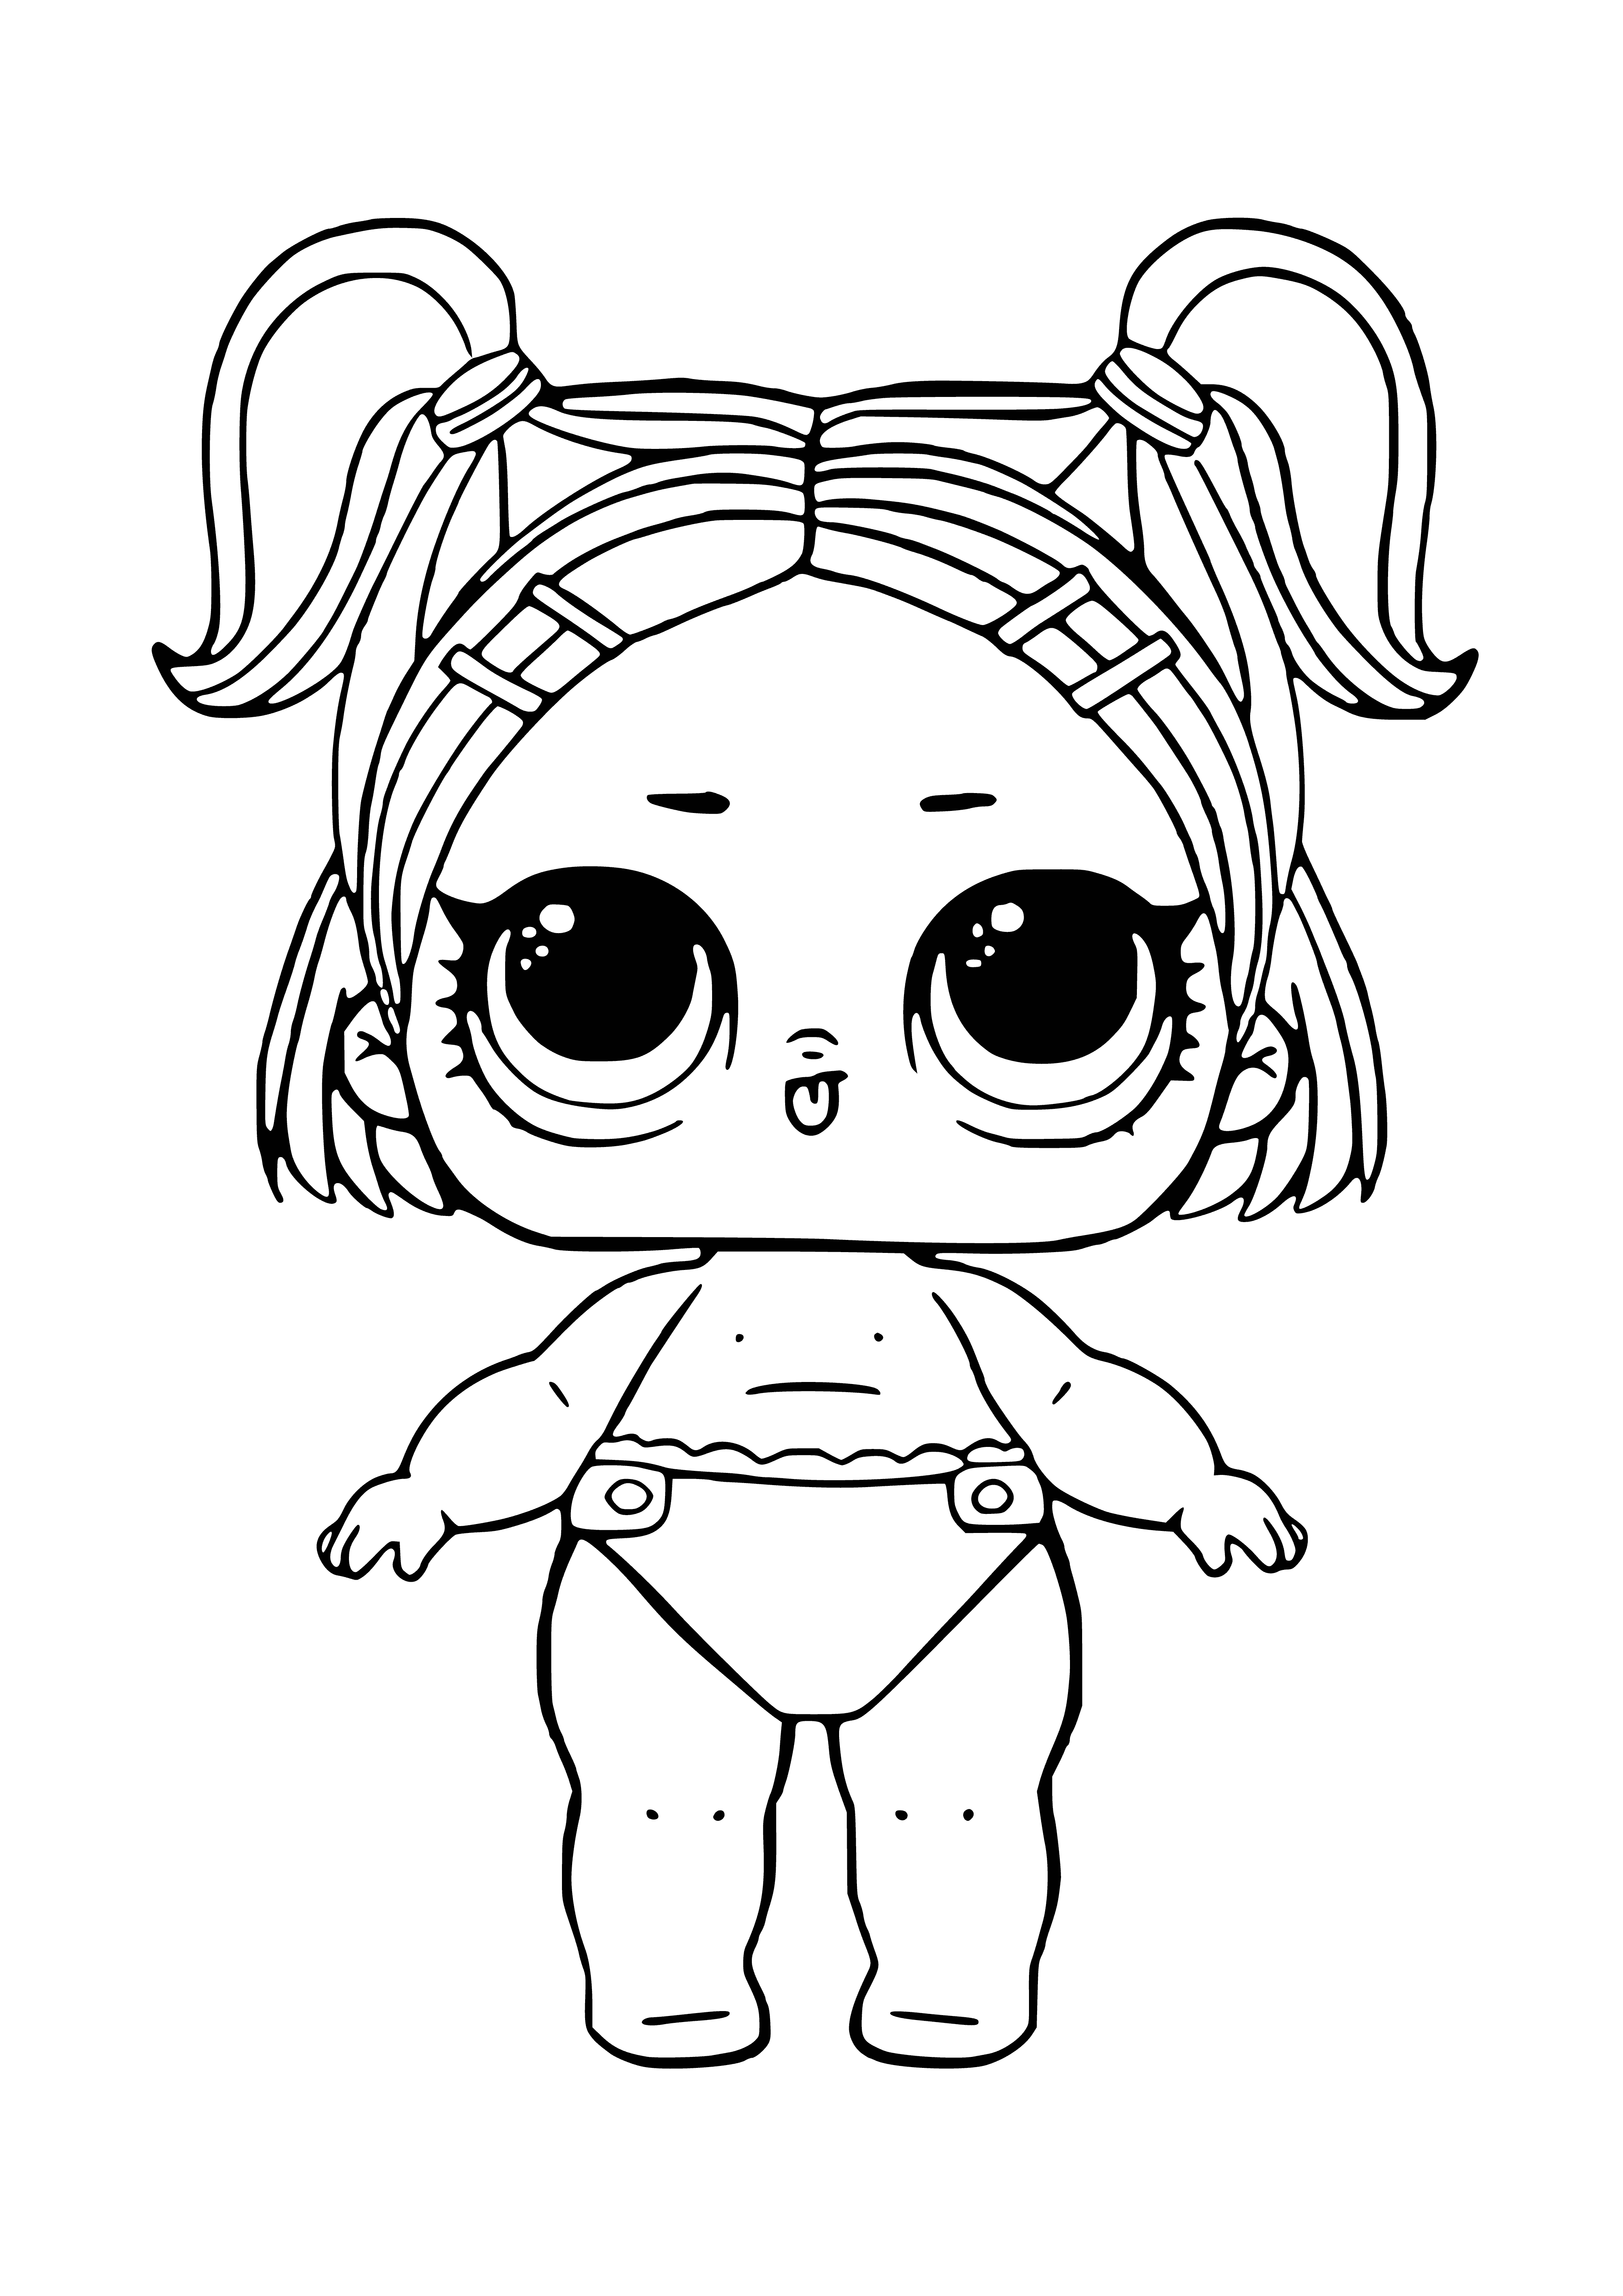 coloring page: Baby sits in middle of LOL Surprise packaging, surrounded by ball, brush & bottle with hands on cheeks & big smile.